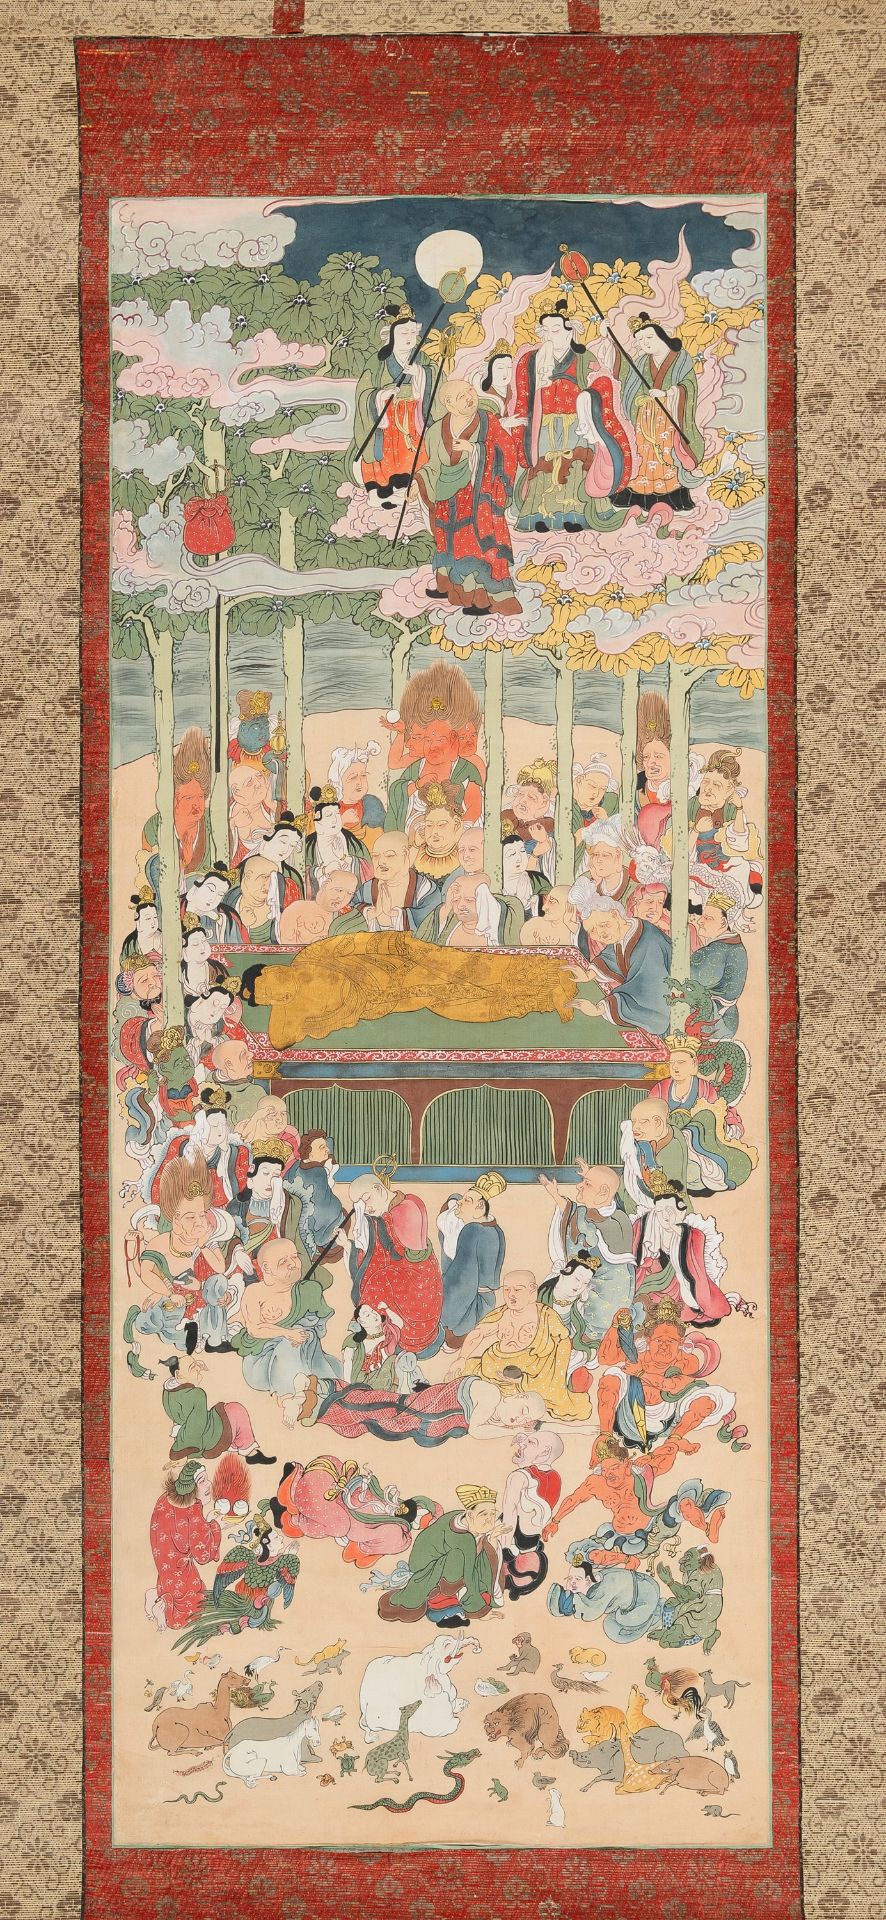 A RARE SCROLL PAINTING DEPICTING THE DEATH OF THE HISTORICAL BUDDHA (NEHAN-ZU)